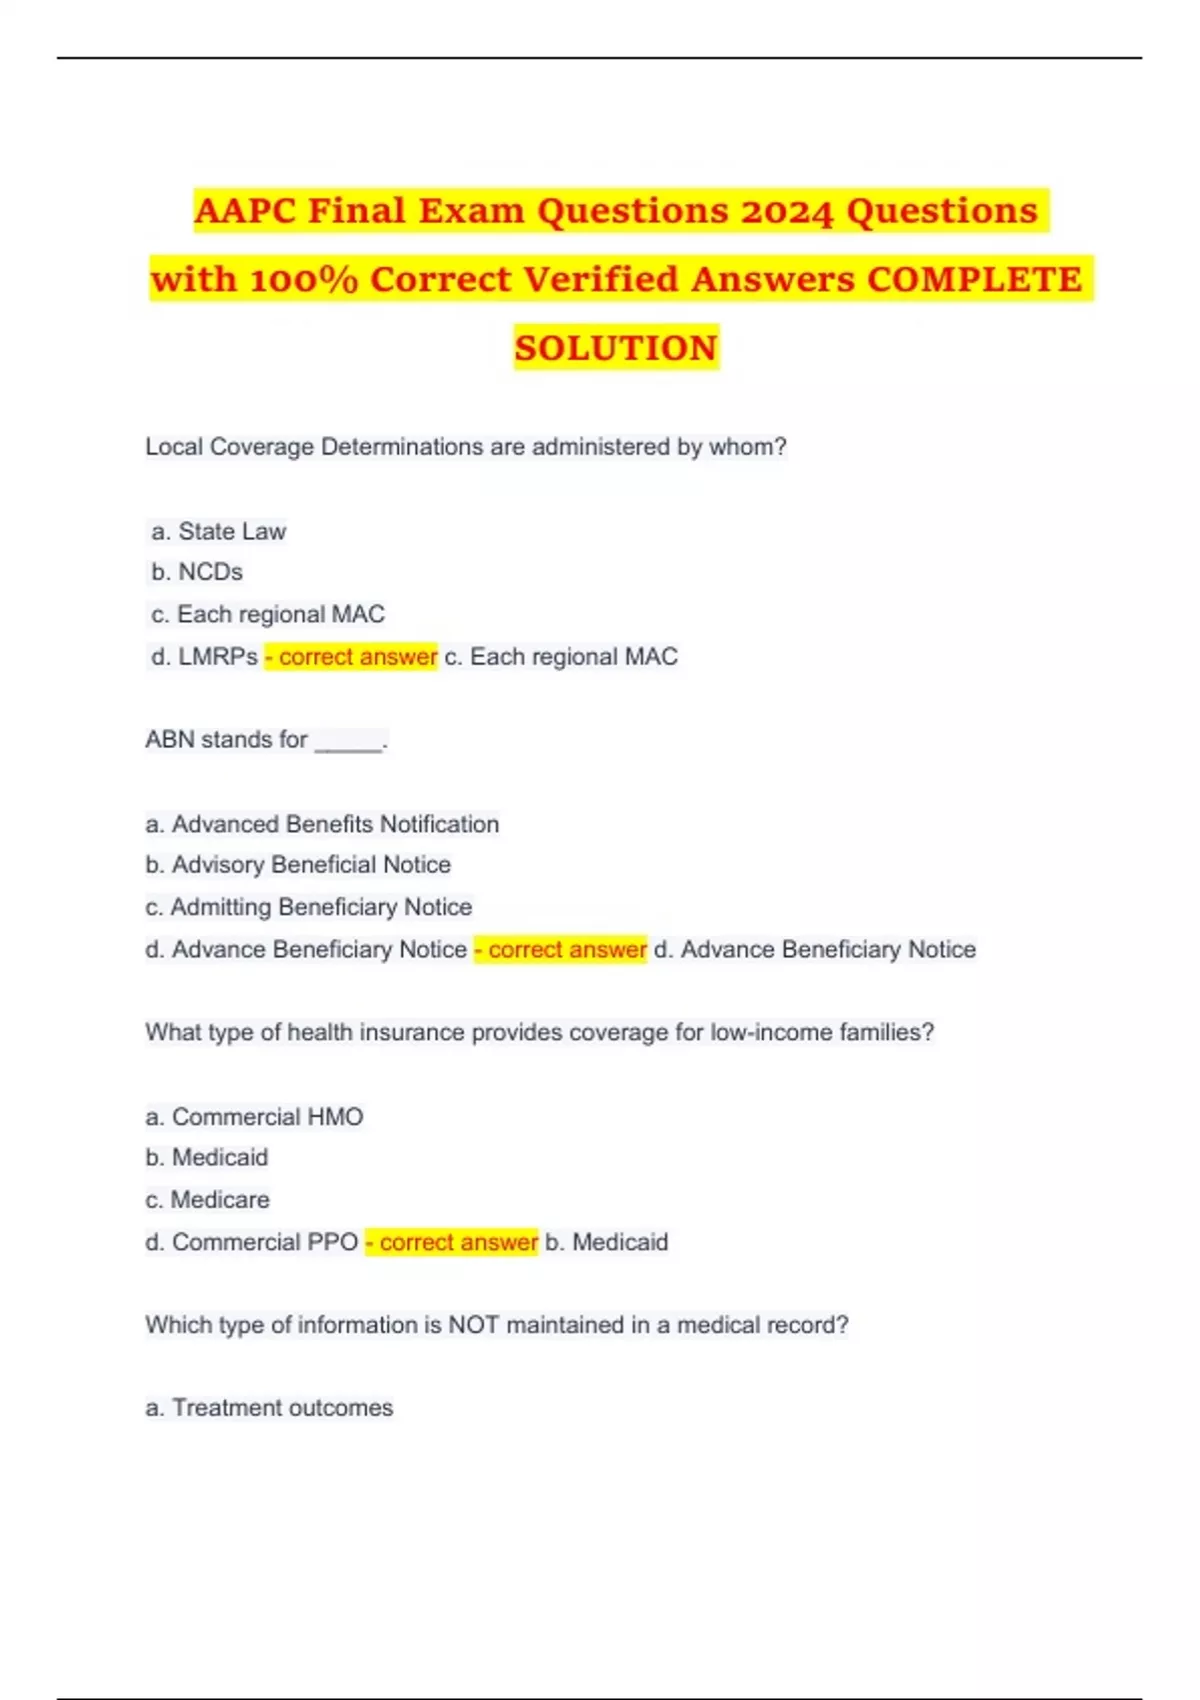 AAPC Final Exam Questions 2024 Questions with 100 Correct Verified